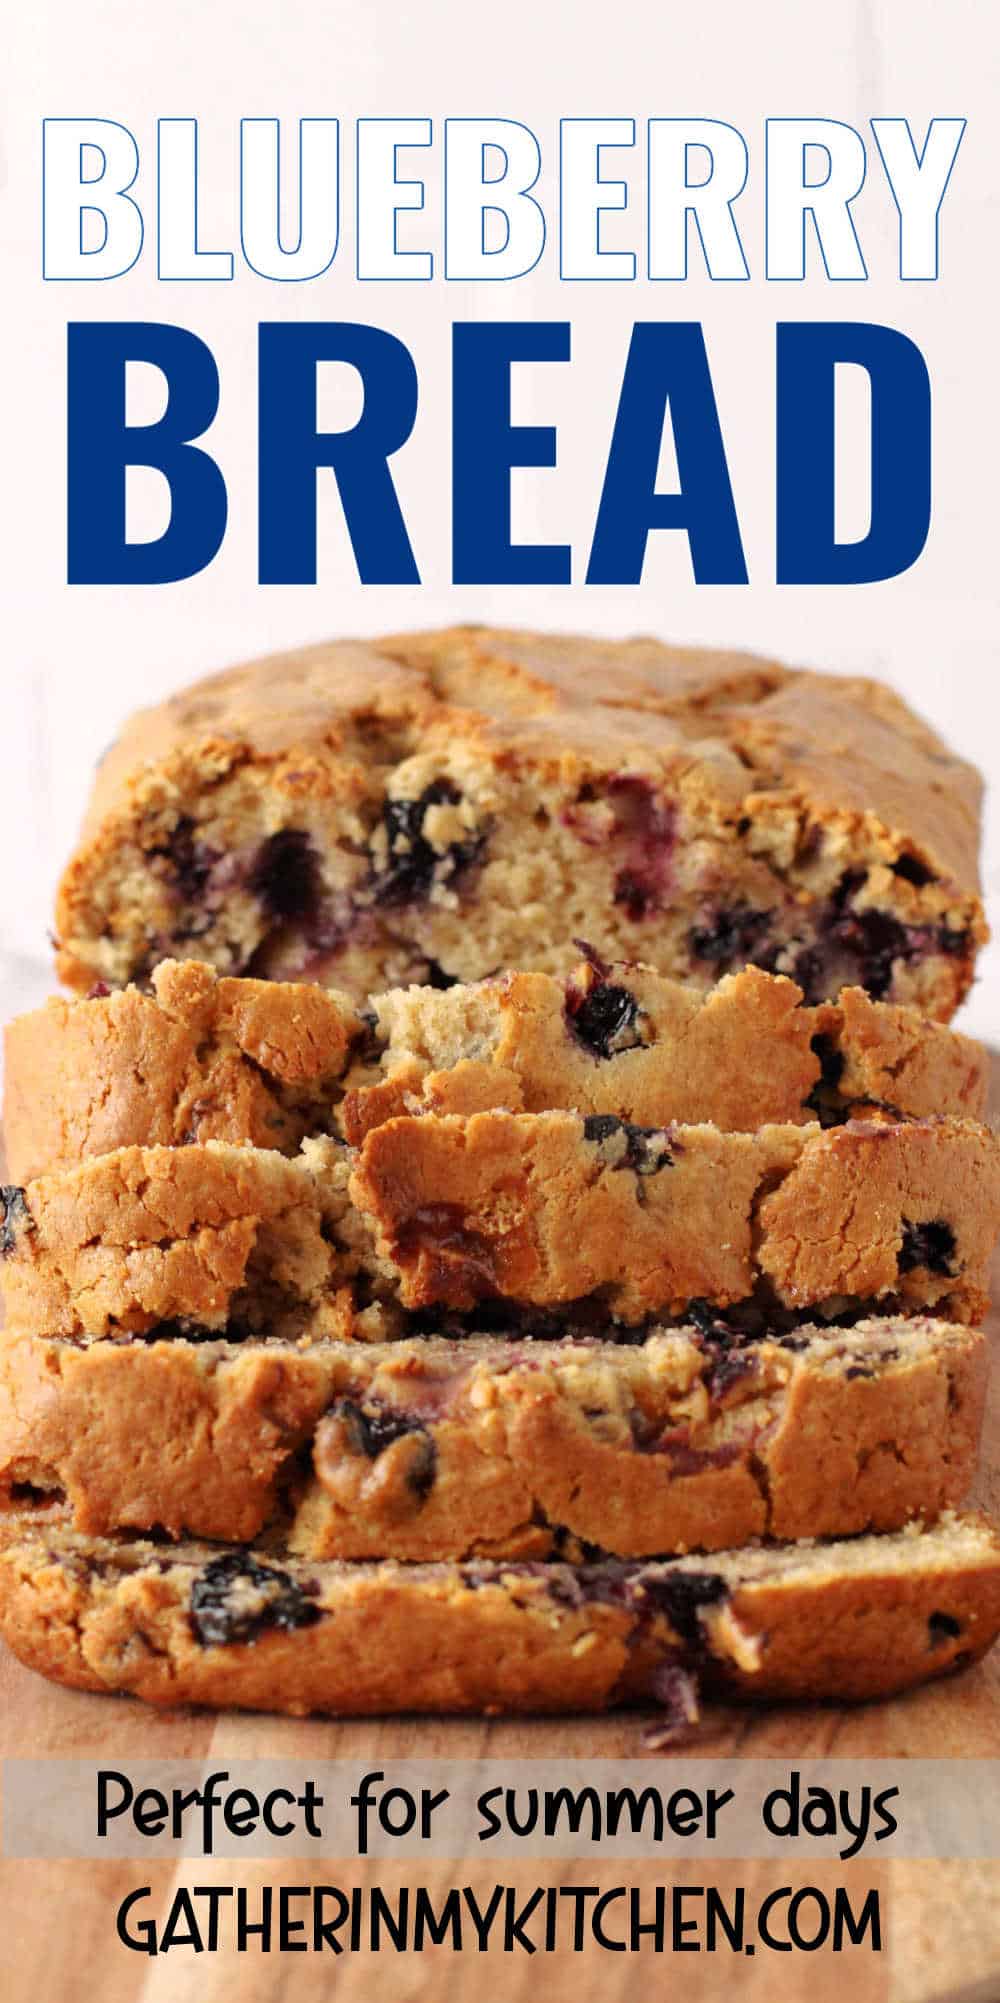 Pin image: top says "Blueberry Bread" and bottom has a pic of blueberry bread with the words "Perfect for summer days" written over it.